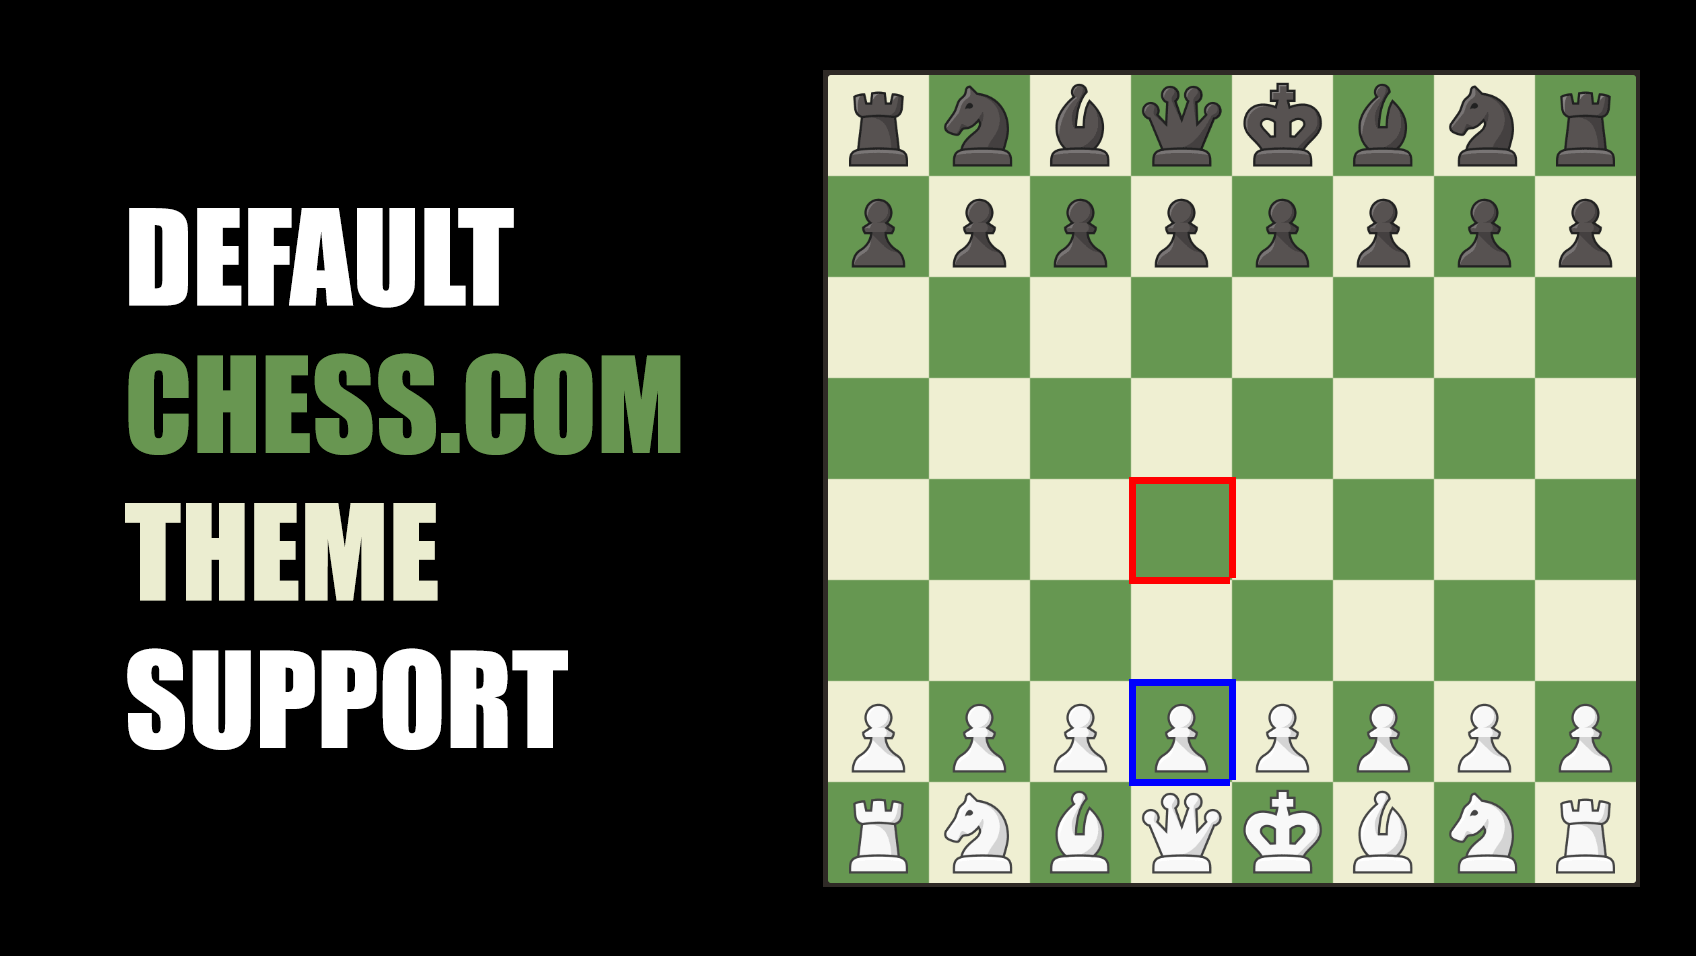 chess.com default board and pieces